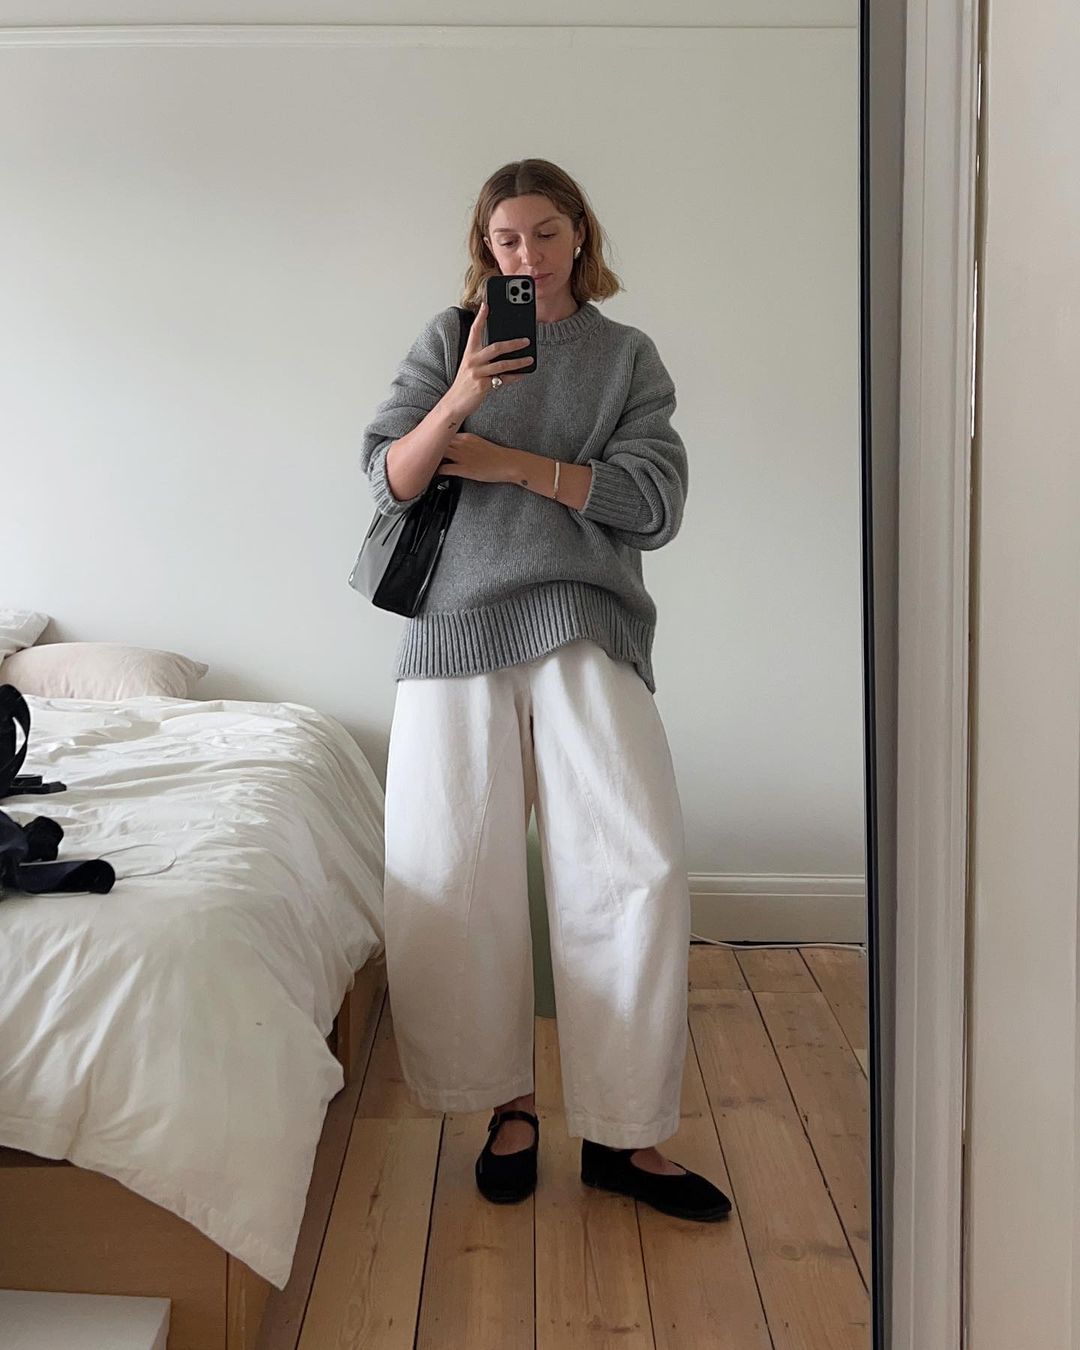 Brittany Bathgate in Mary-Janes with white trousers and jumper